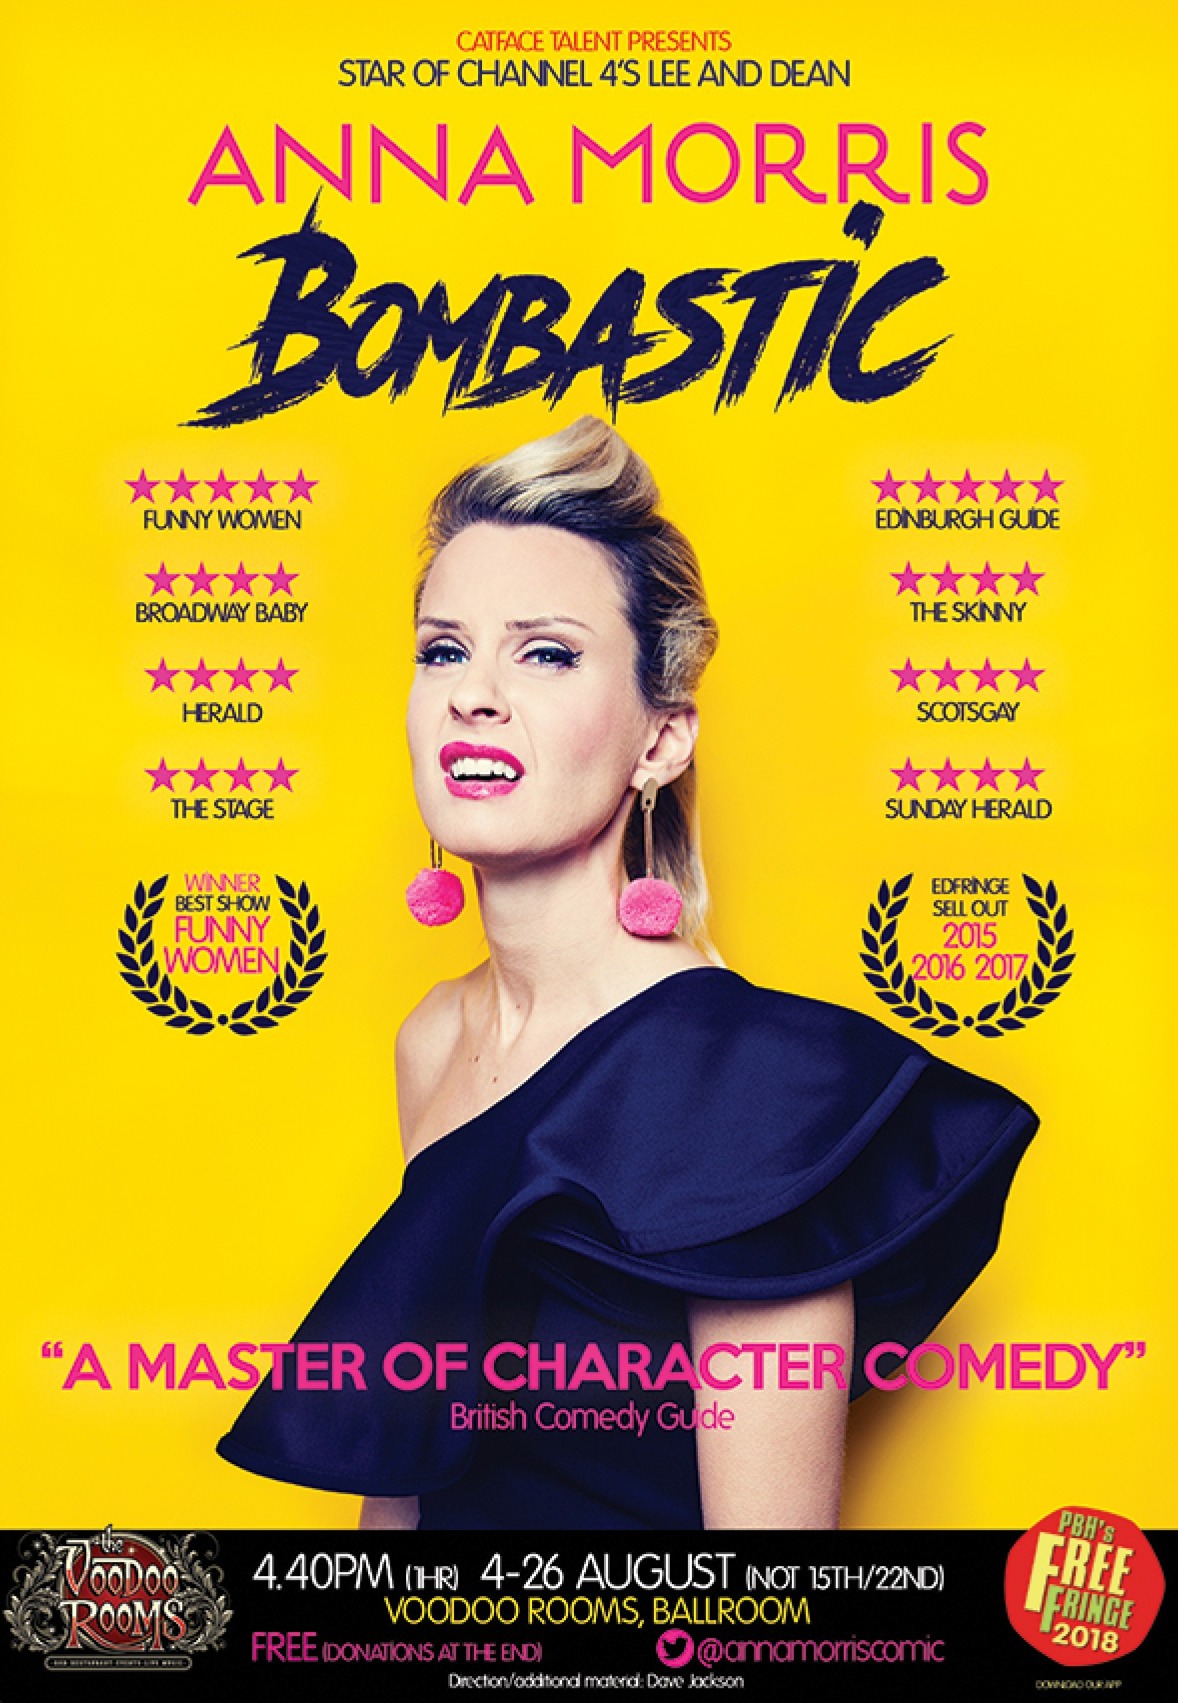 The poster for Anna Morris: Bombastic